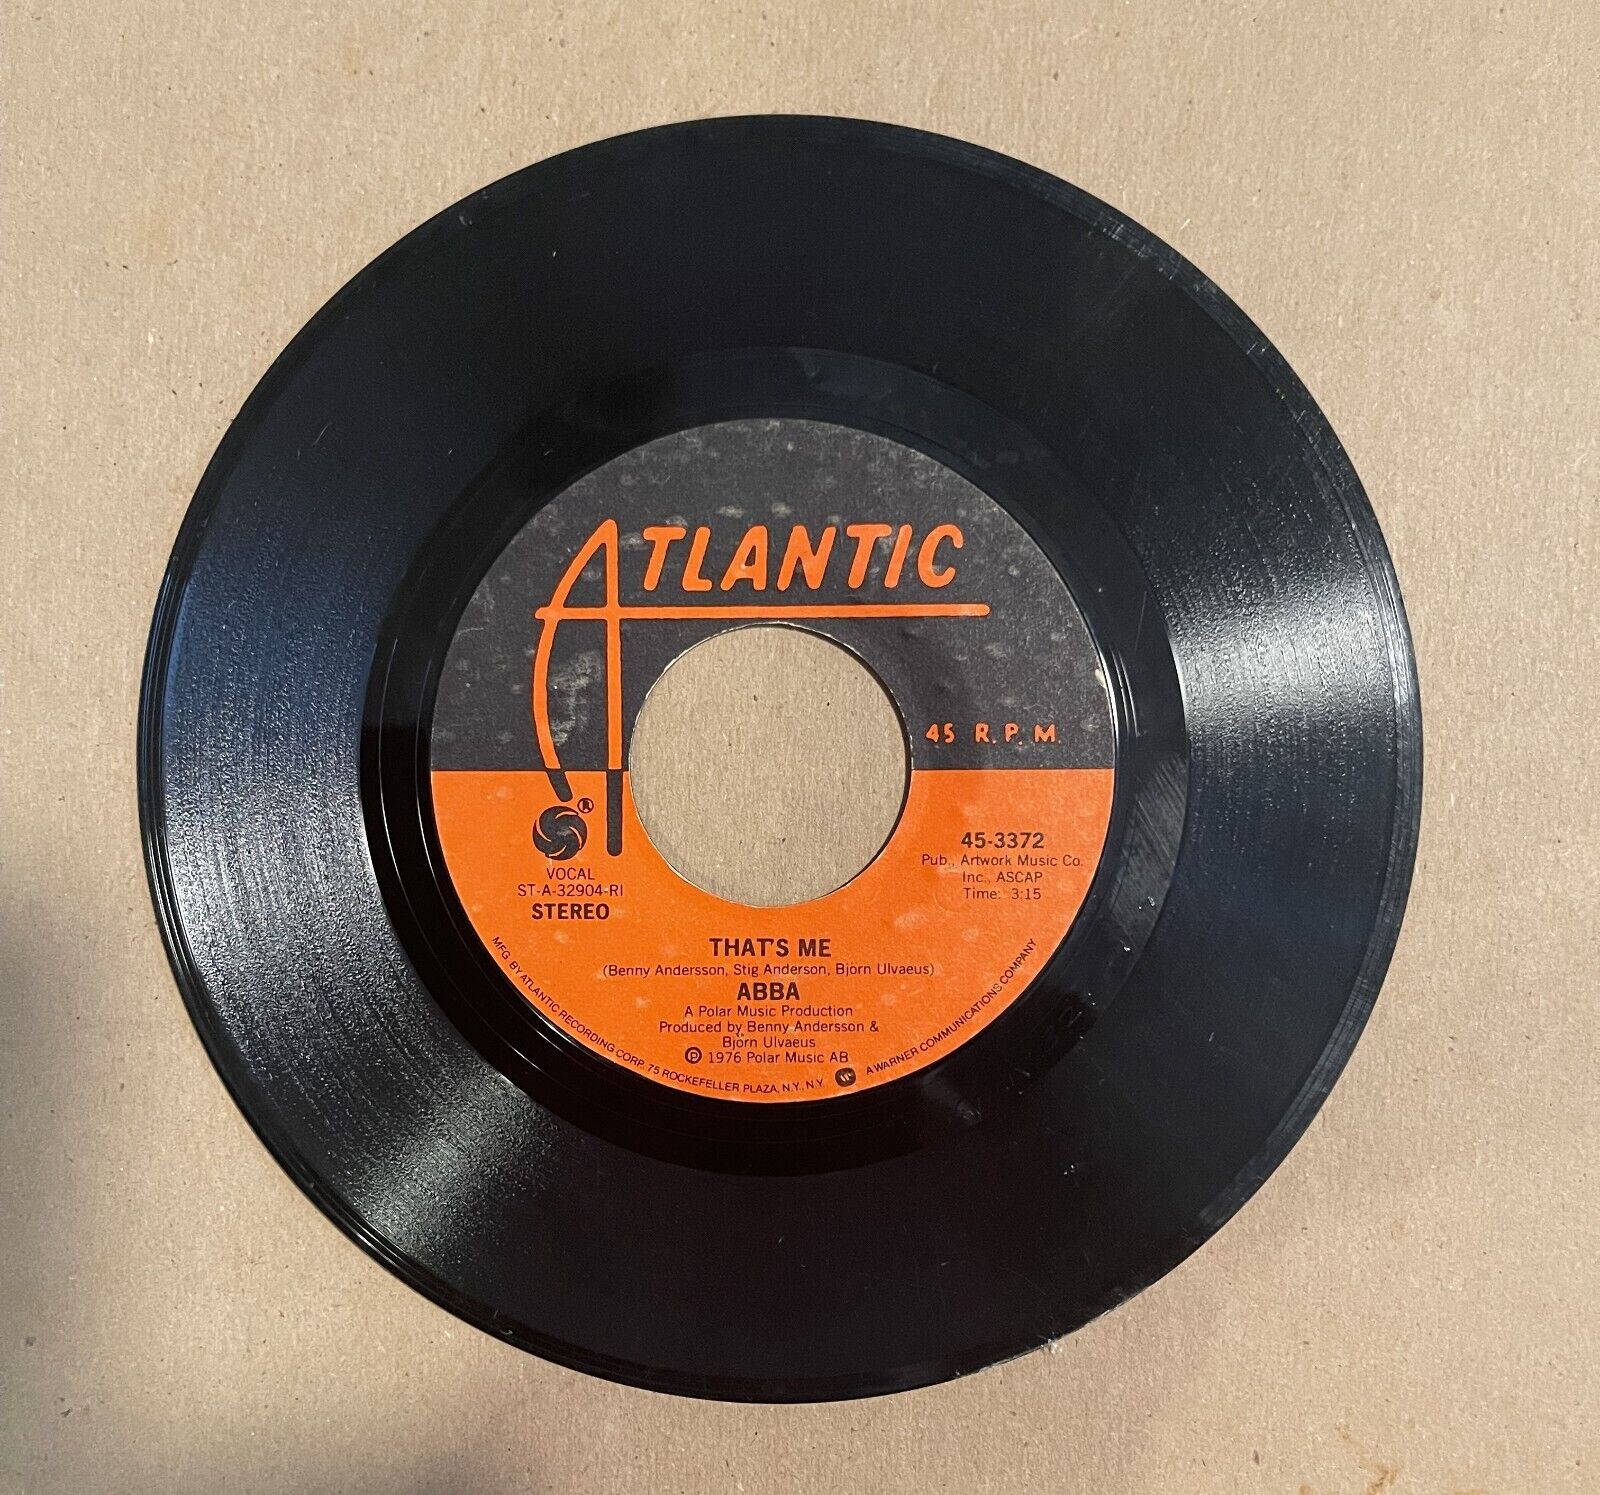 ATLANTIC RECORDS, ABBA. 45 RPM 7 INCH. DANCING QUEEN. TESTED.